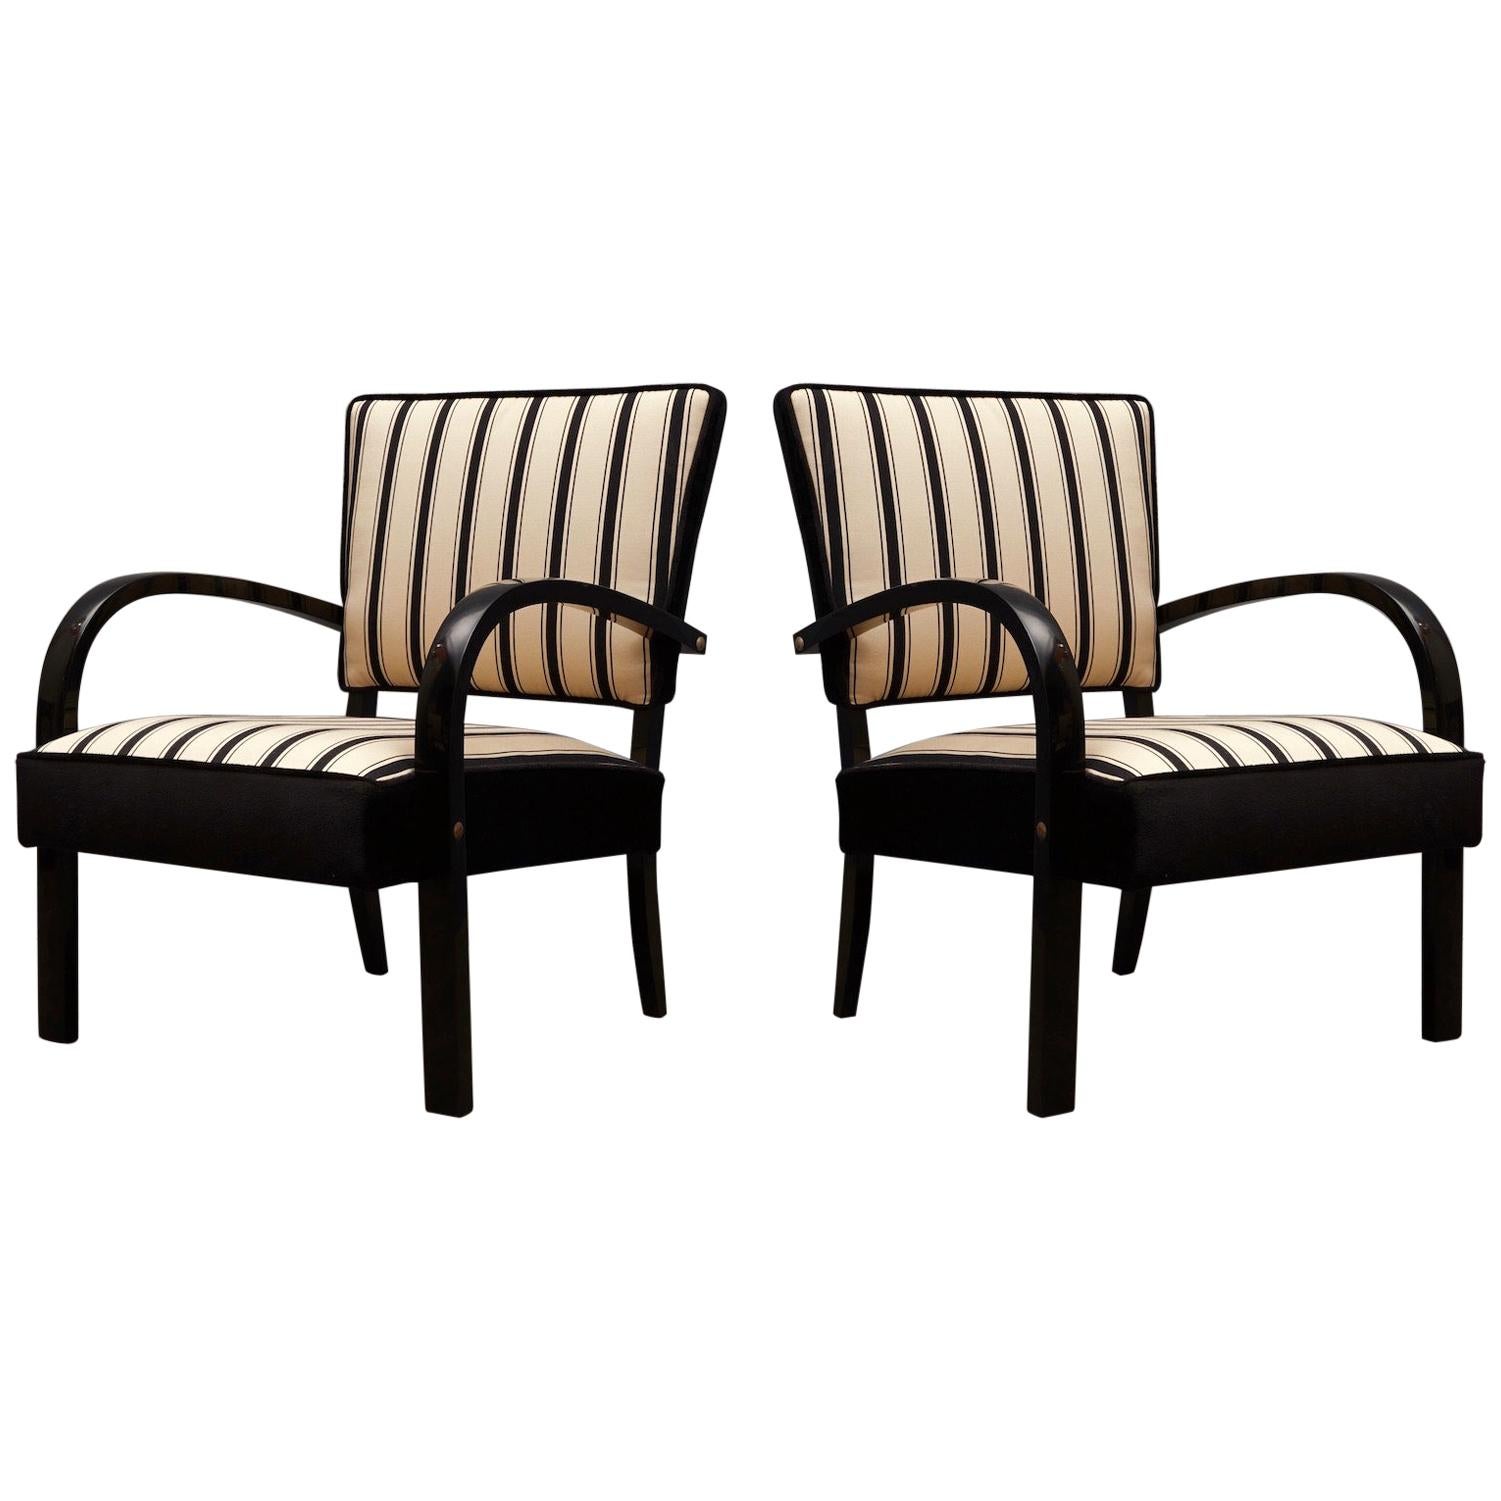 Midcentury Black and White Striped Fabric Italian Armchairs, 1950